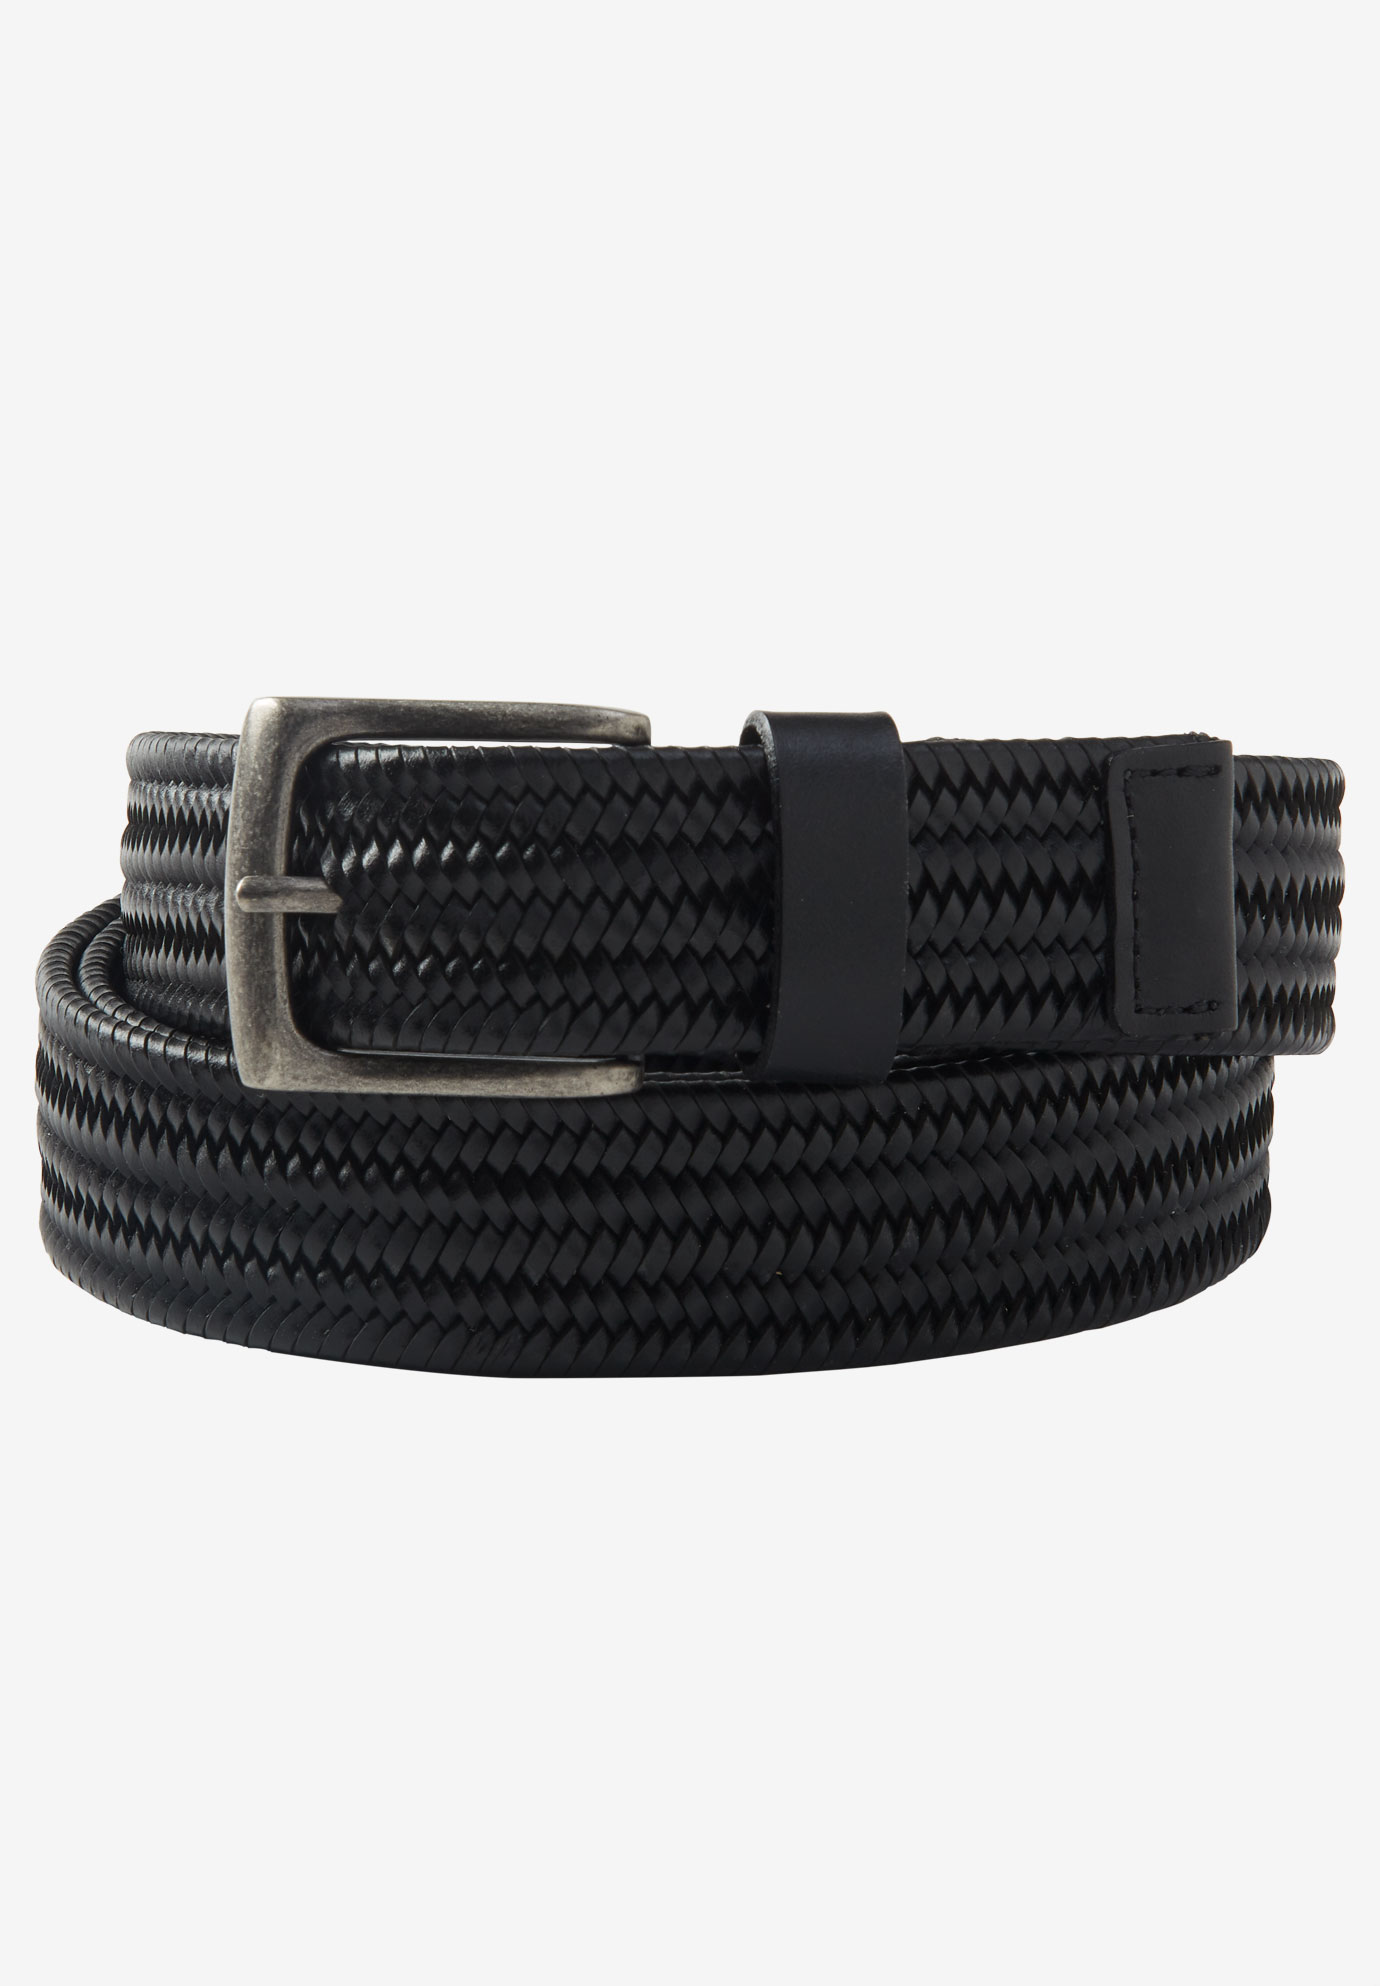 S44 3" WIDE NATURAL BRAIDED LEATHER AND ELASTIC FASHION BELT FOR LADIES 